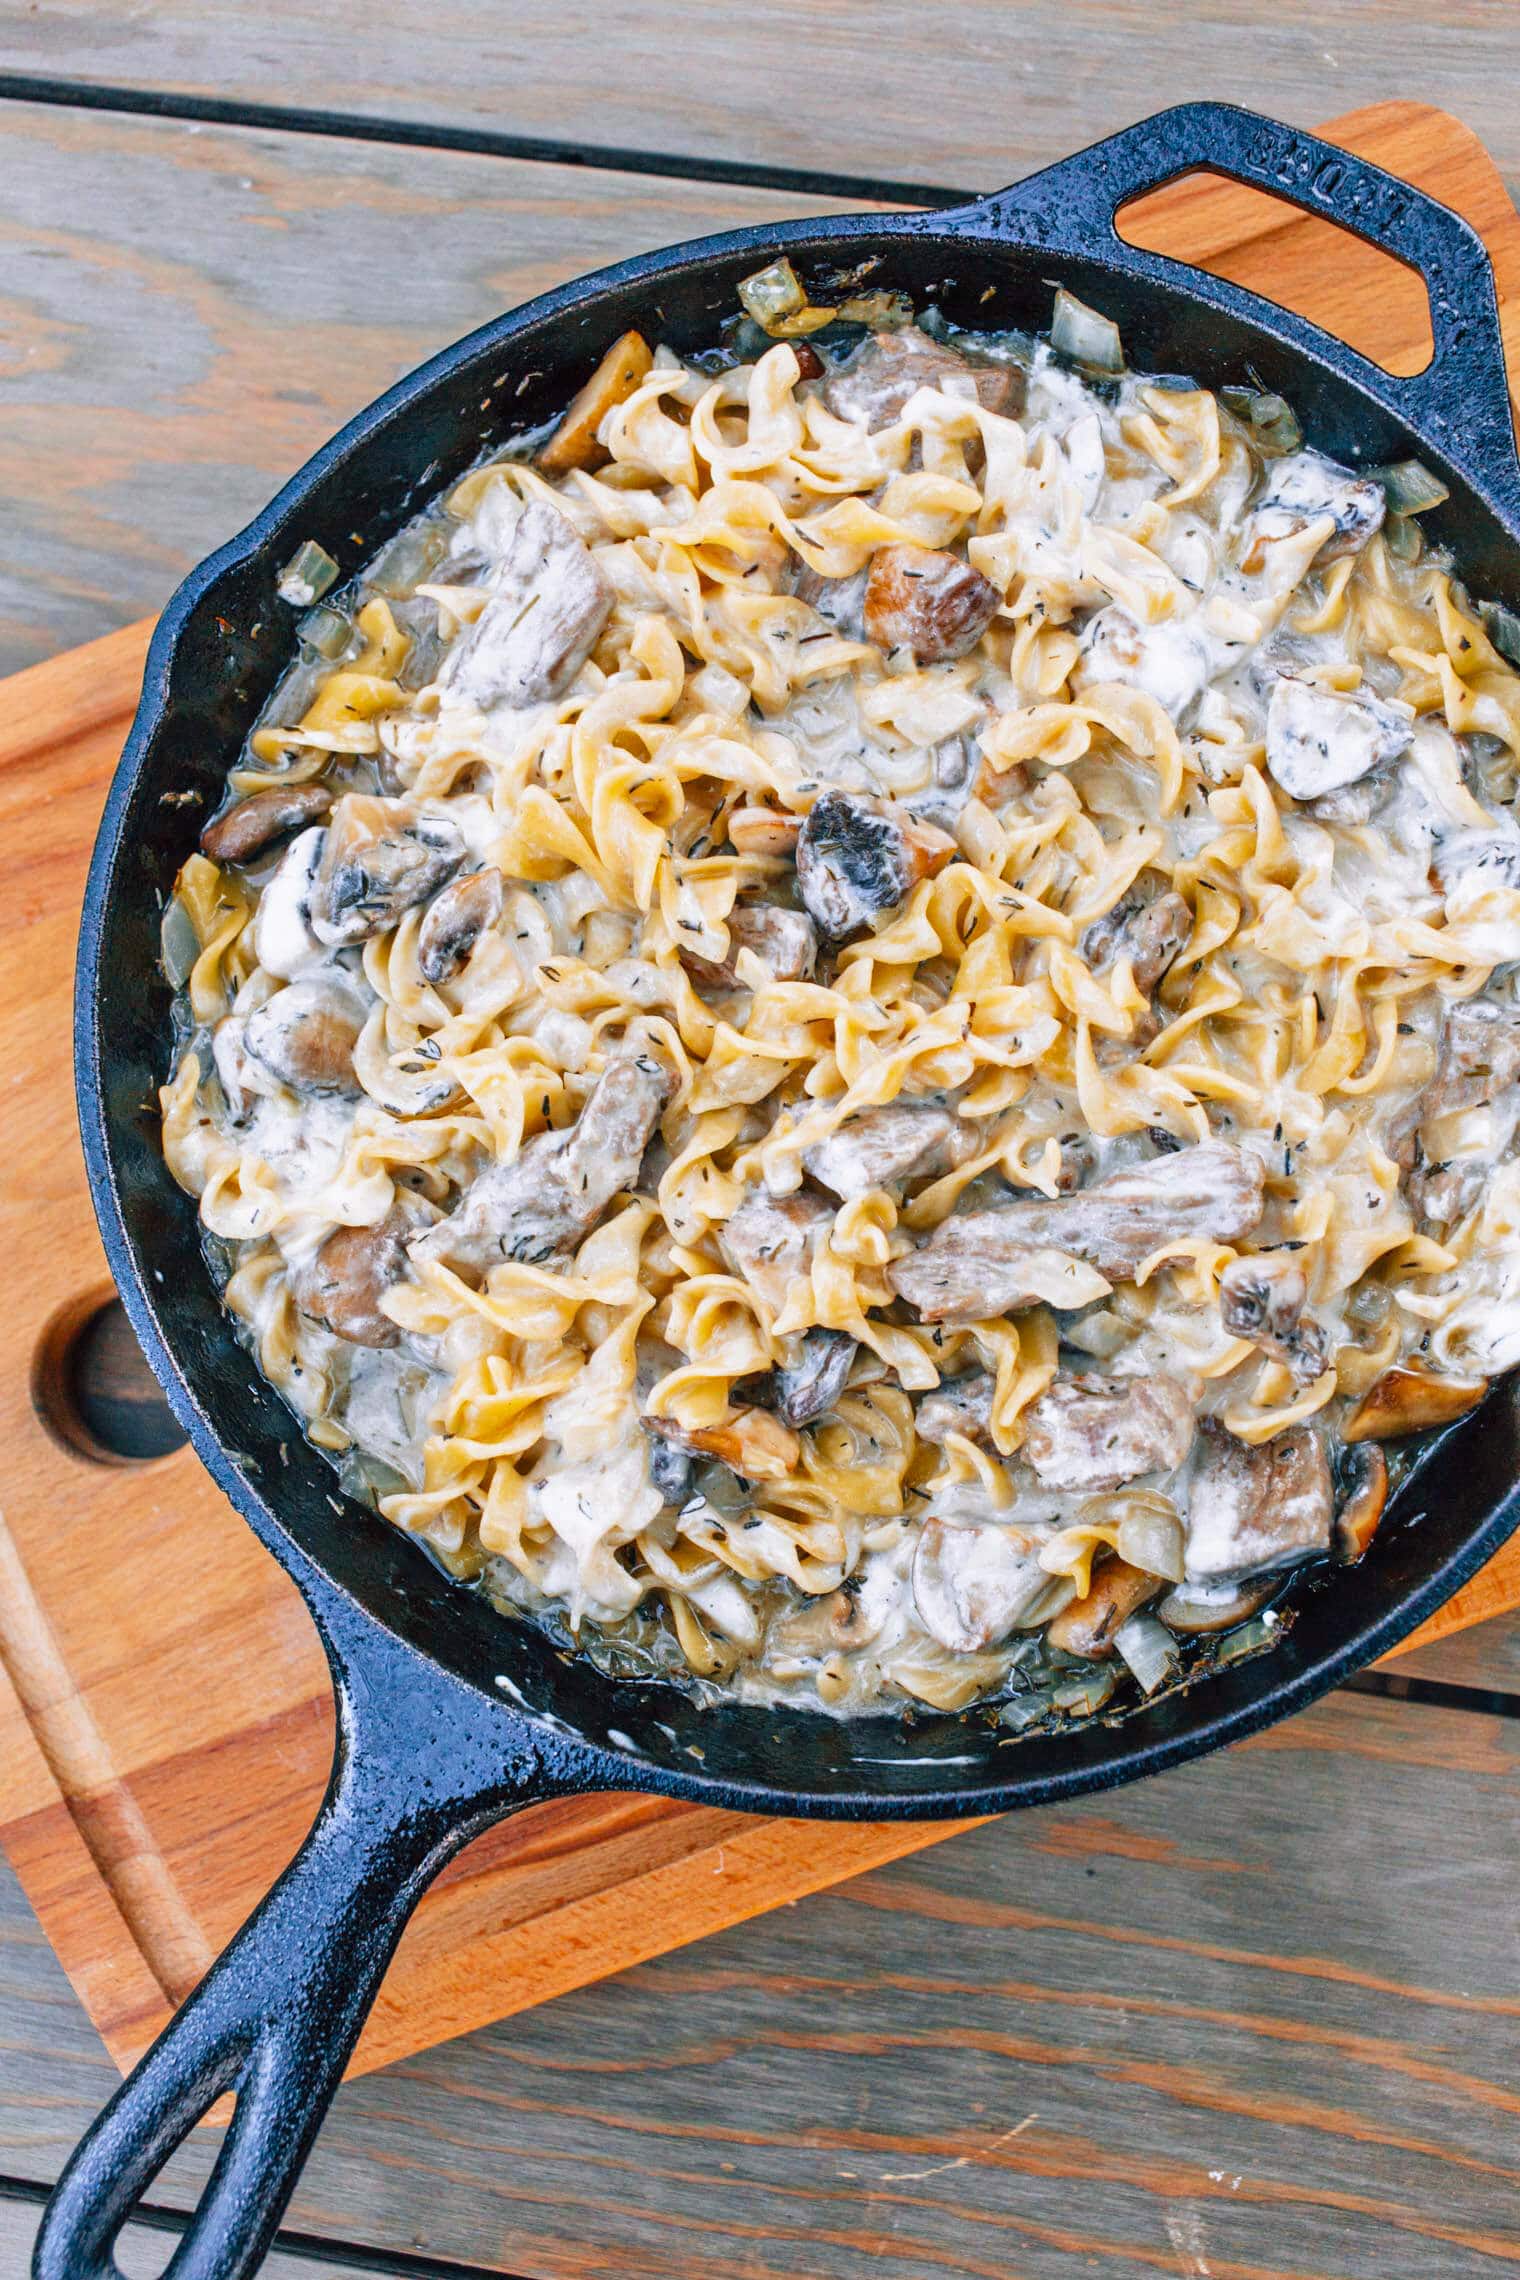 Beef stroganoff in a cast iron skillet on a wooden cutting board